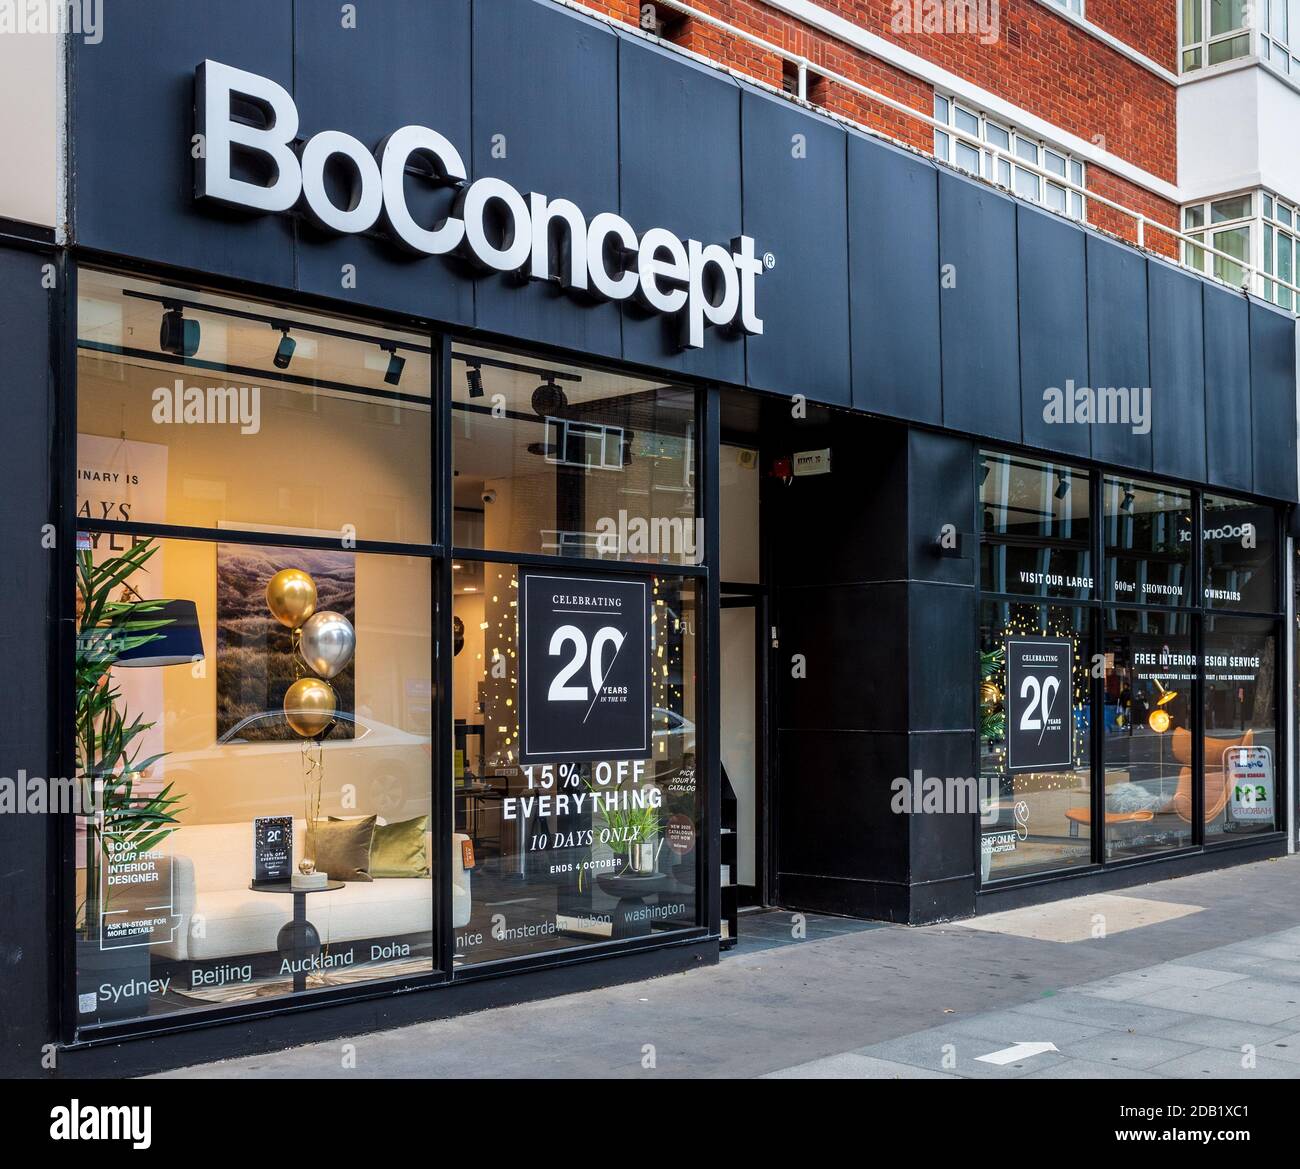 BoConcept furniture store London - BoConcept store on Tottenham Court Rd Central London. BoConcept was founded in Denmark in 1952. Stock Photo